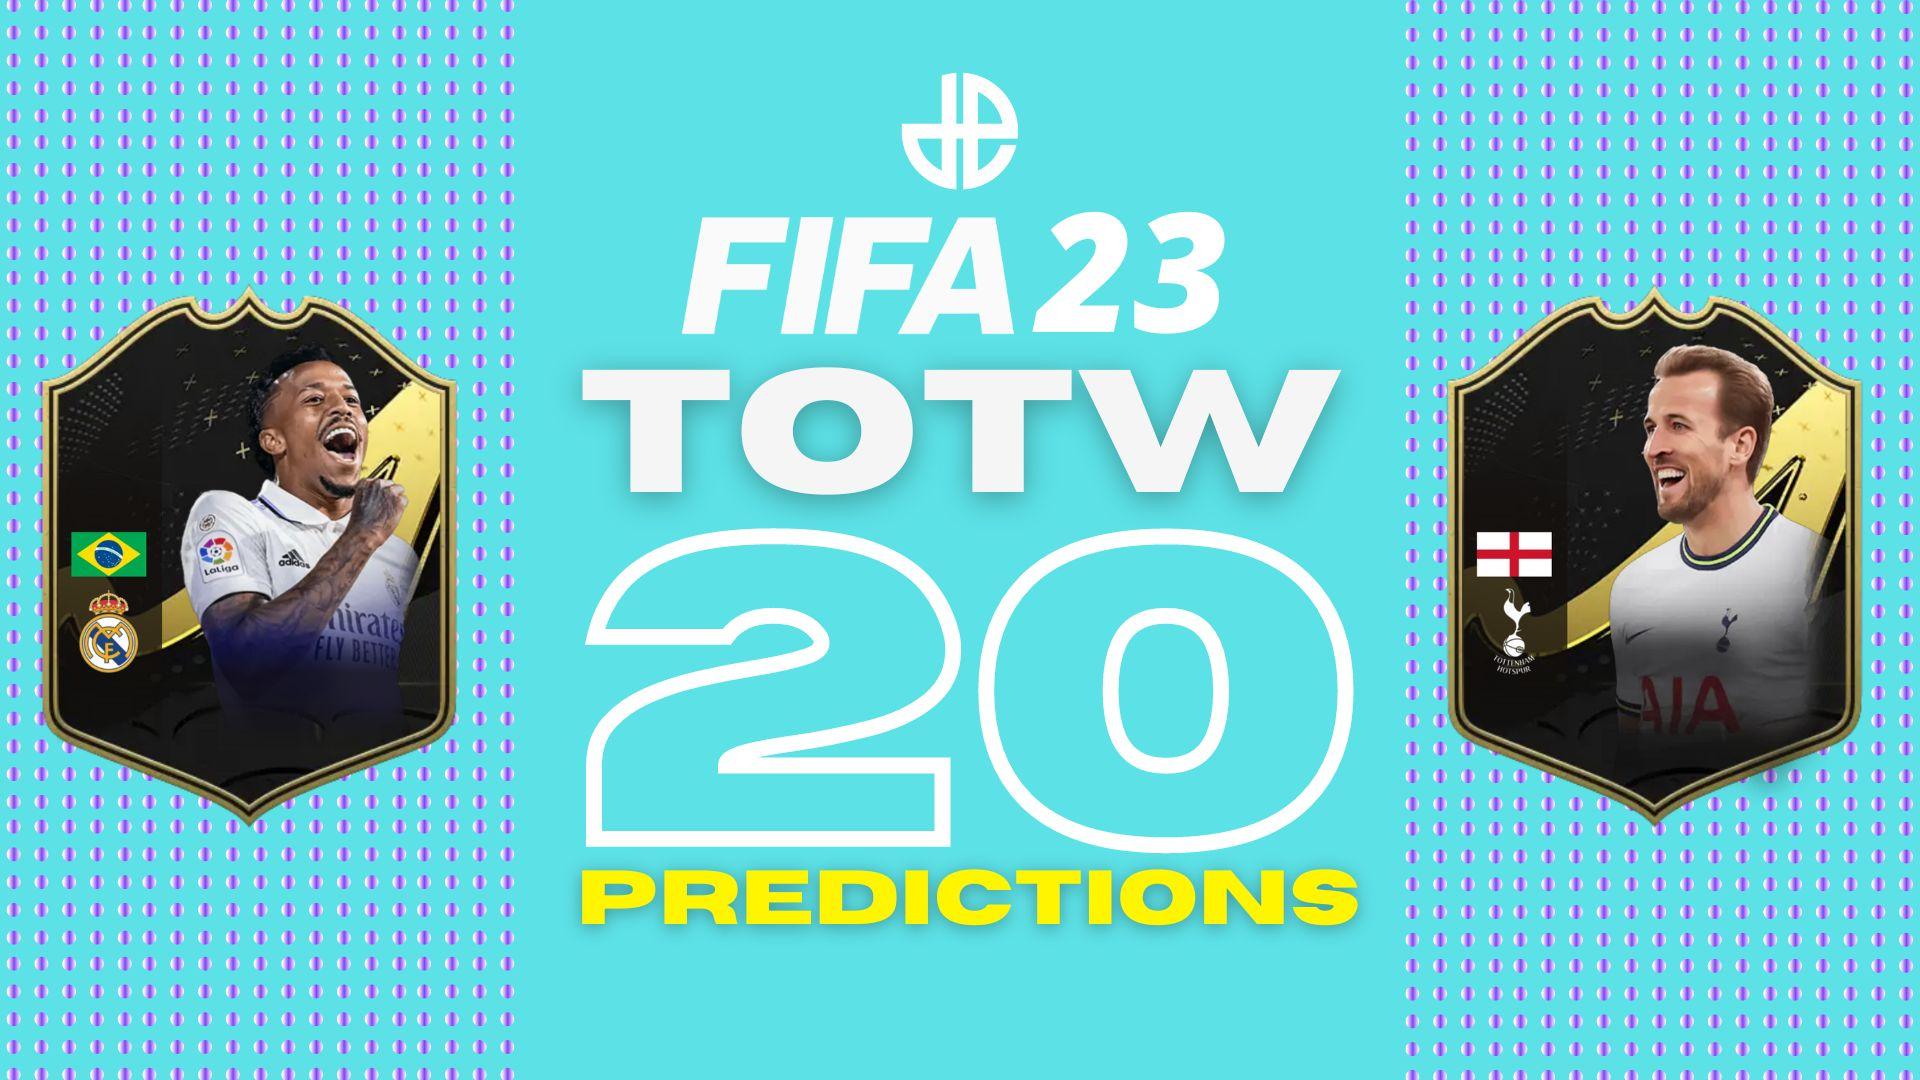 FIFA 23 cards of Militao and Kane with TOTW 20 predictions